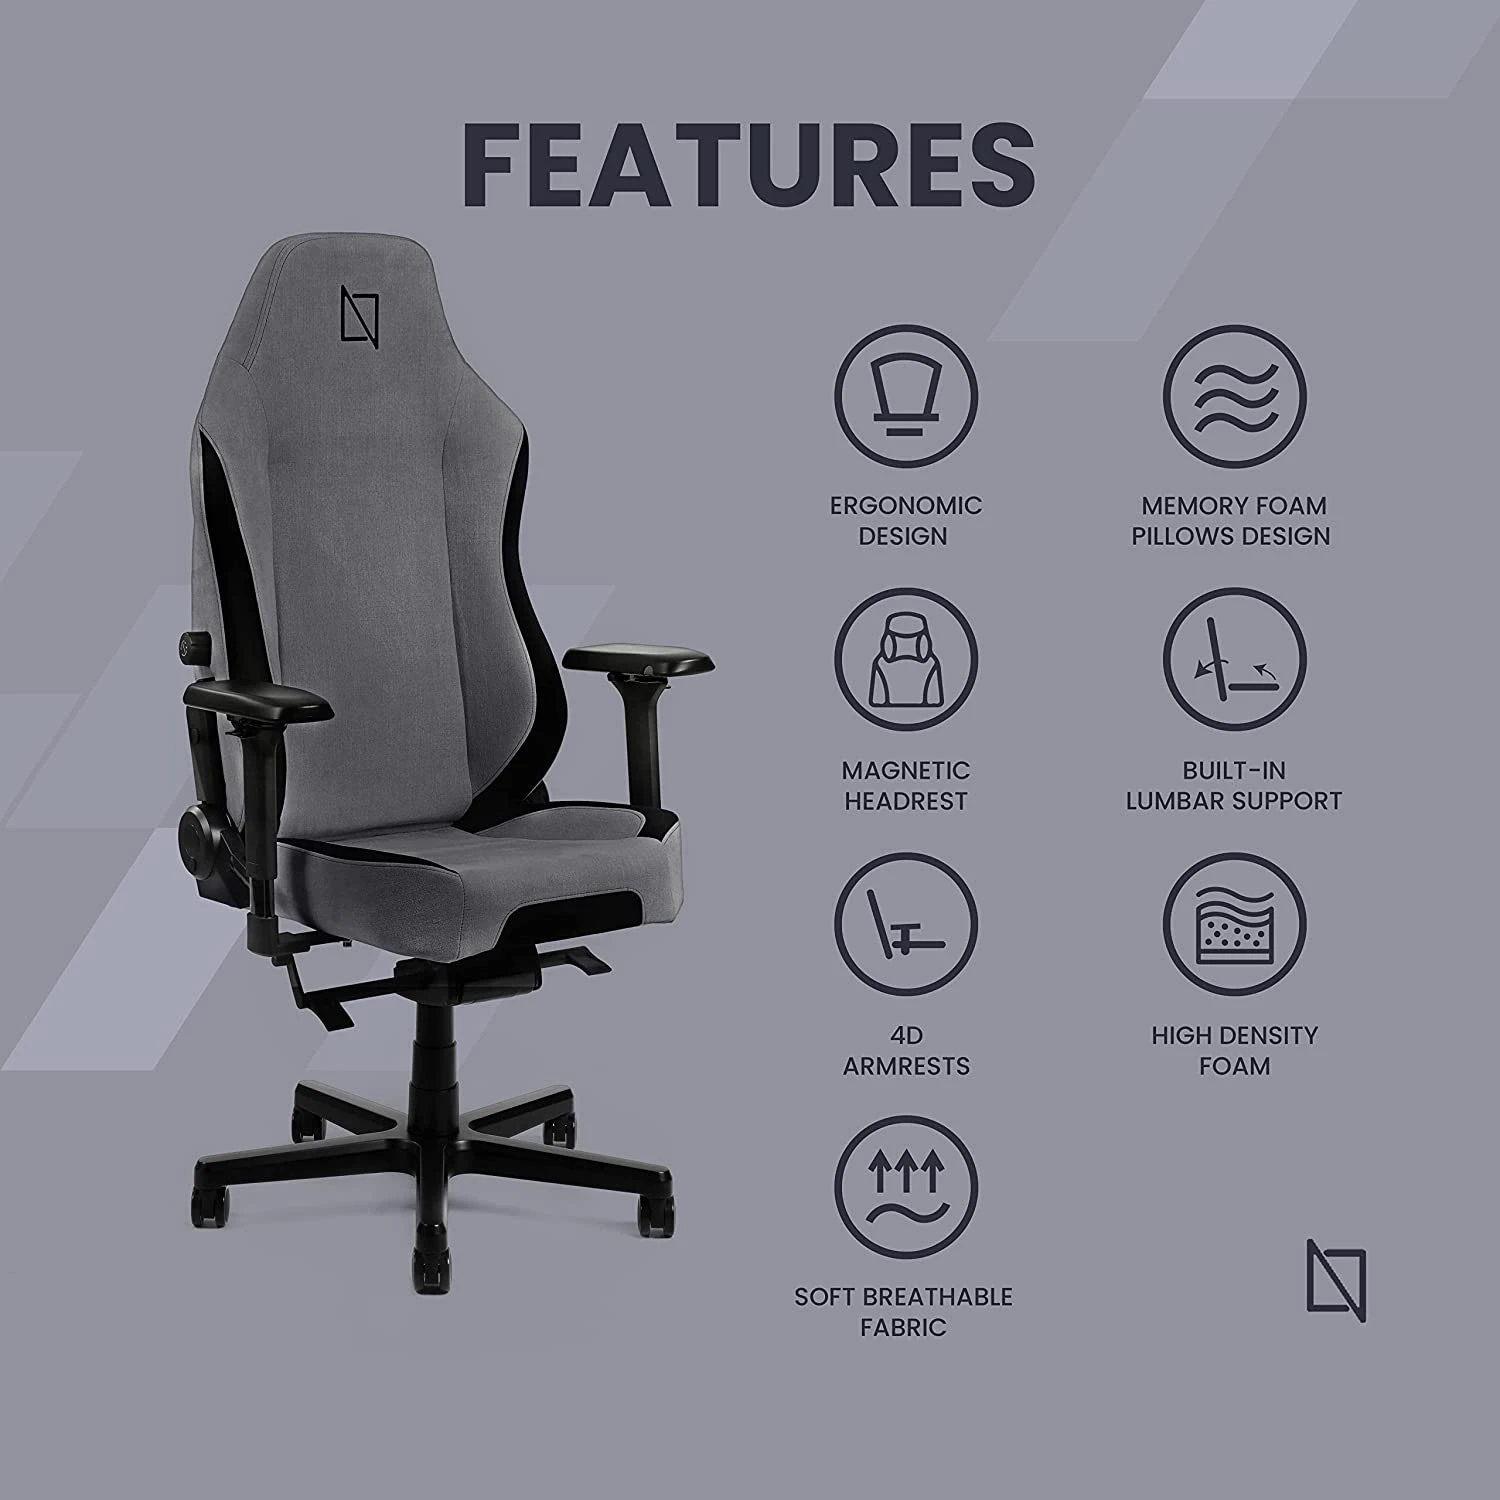 APEX Chair, Premium Ergonomic Soft Fabric Gaming Chair with Memory Foam Pillows, Magnetic Headrest & Integrated Lumbar Support By Navodesk